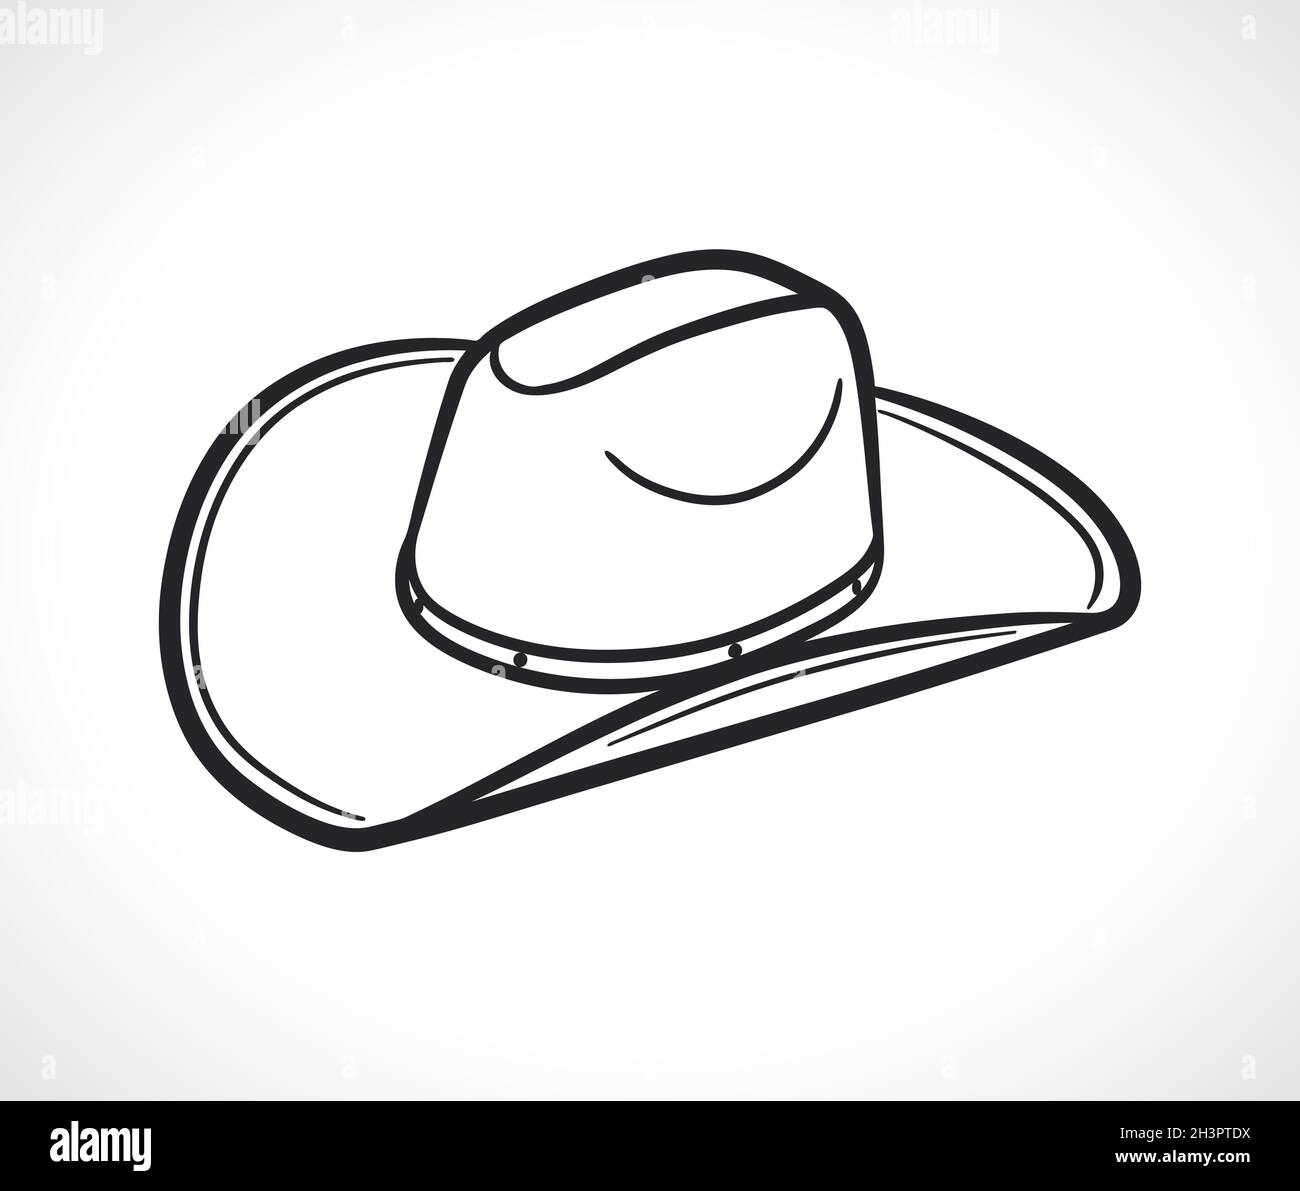 cowboy hat black and white isolated design Stock Vector